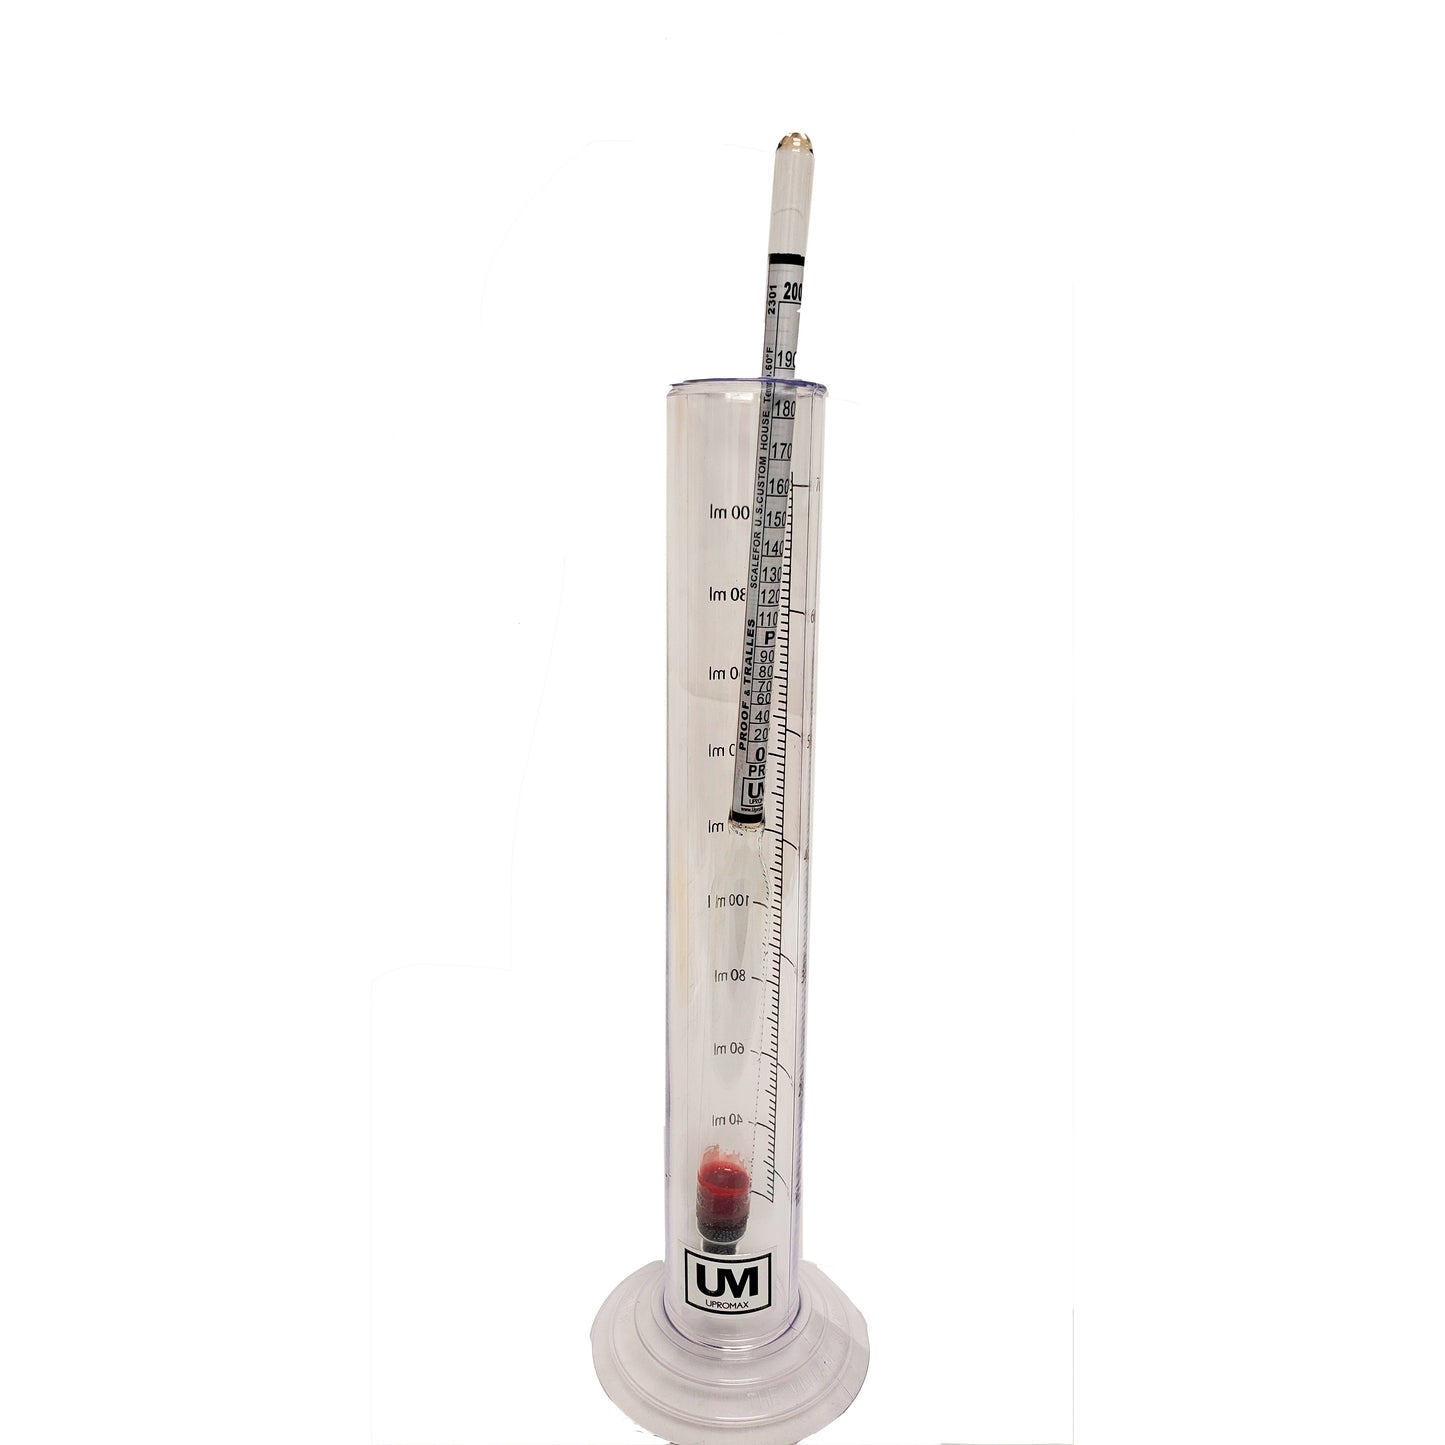 PROOF & TRALLE HYDROMETER ALCOHOL METER DISTILLING TEST SPIRIT SCALE 0-200% case WITH JAR - UproMax